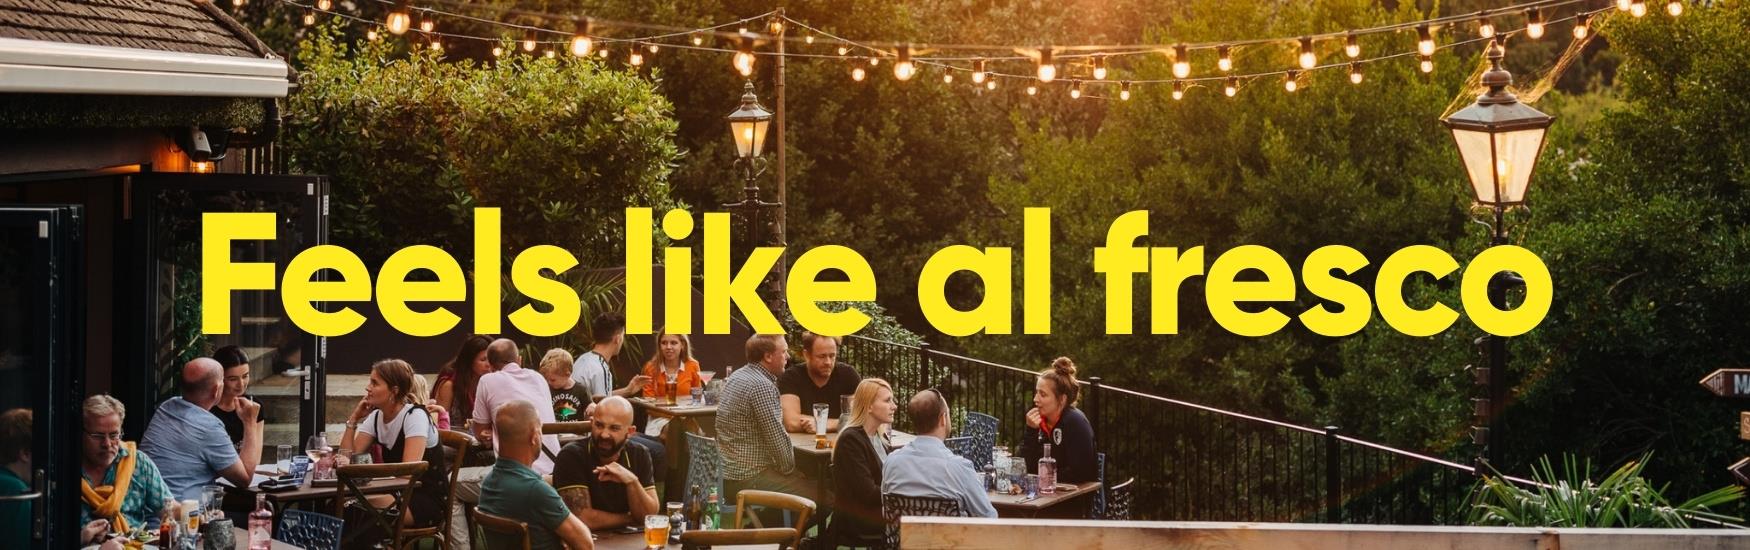 customers enjoying the outside area at Urban Garden in Bournemouth with text that reads "feels like al fresco"